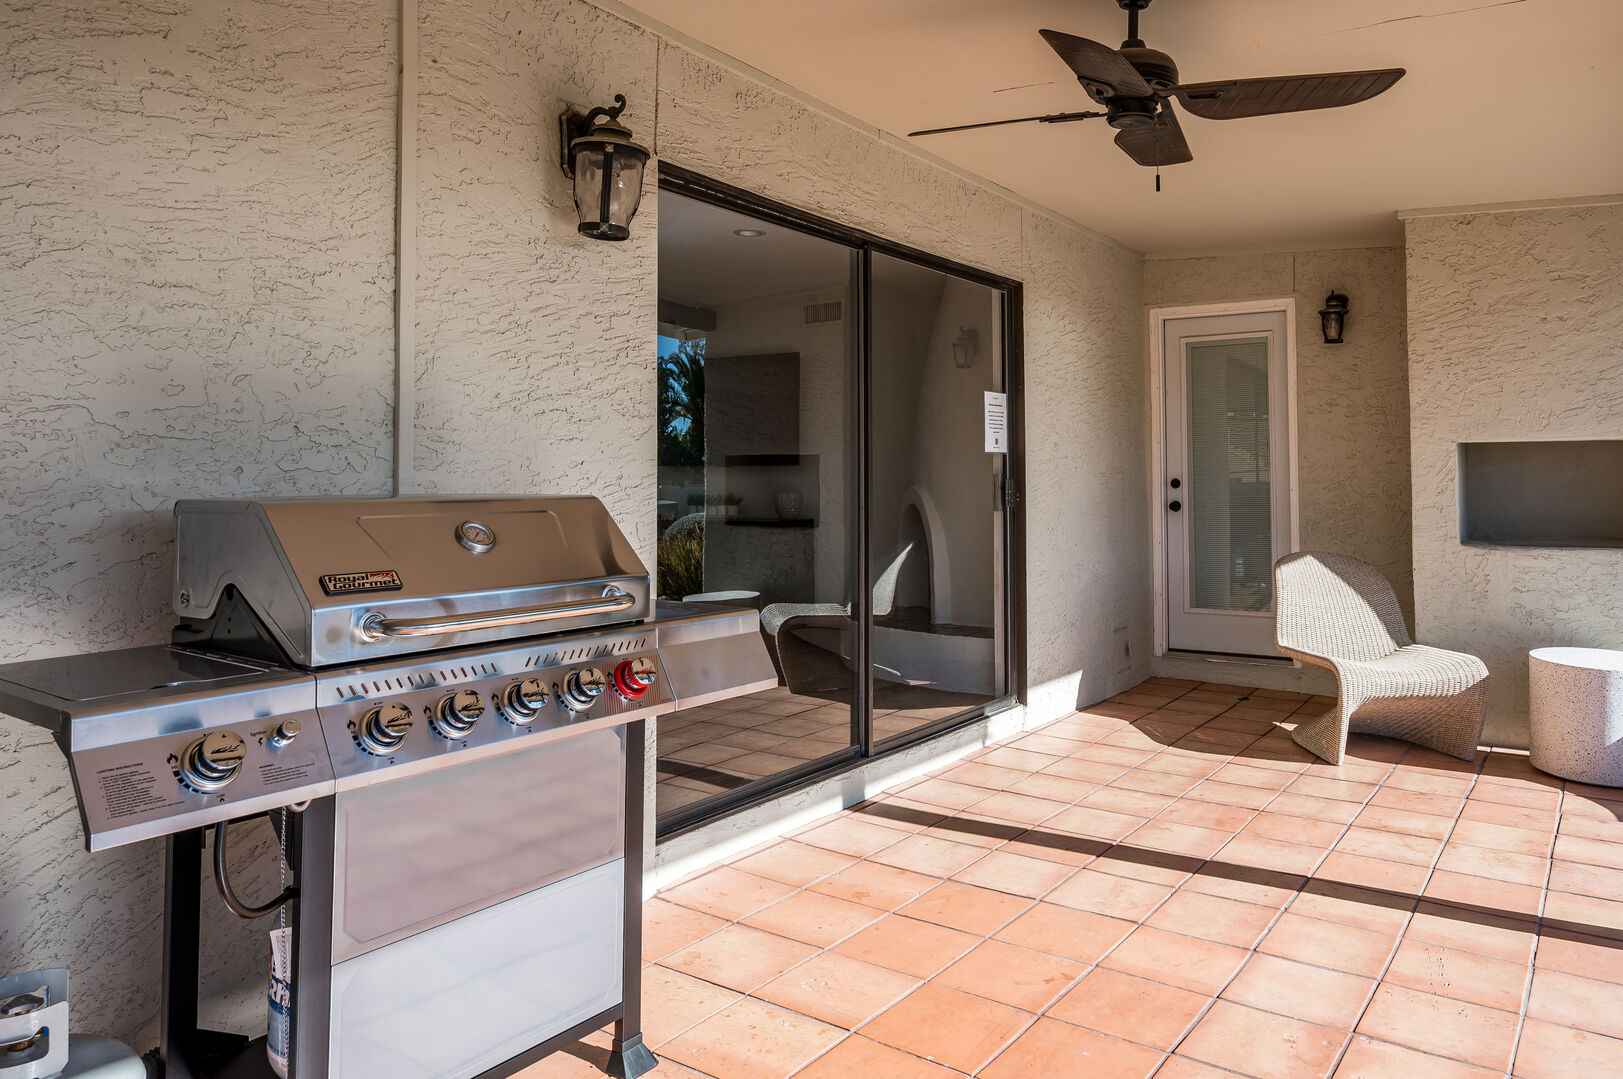 BBQ grill and back porch seating